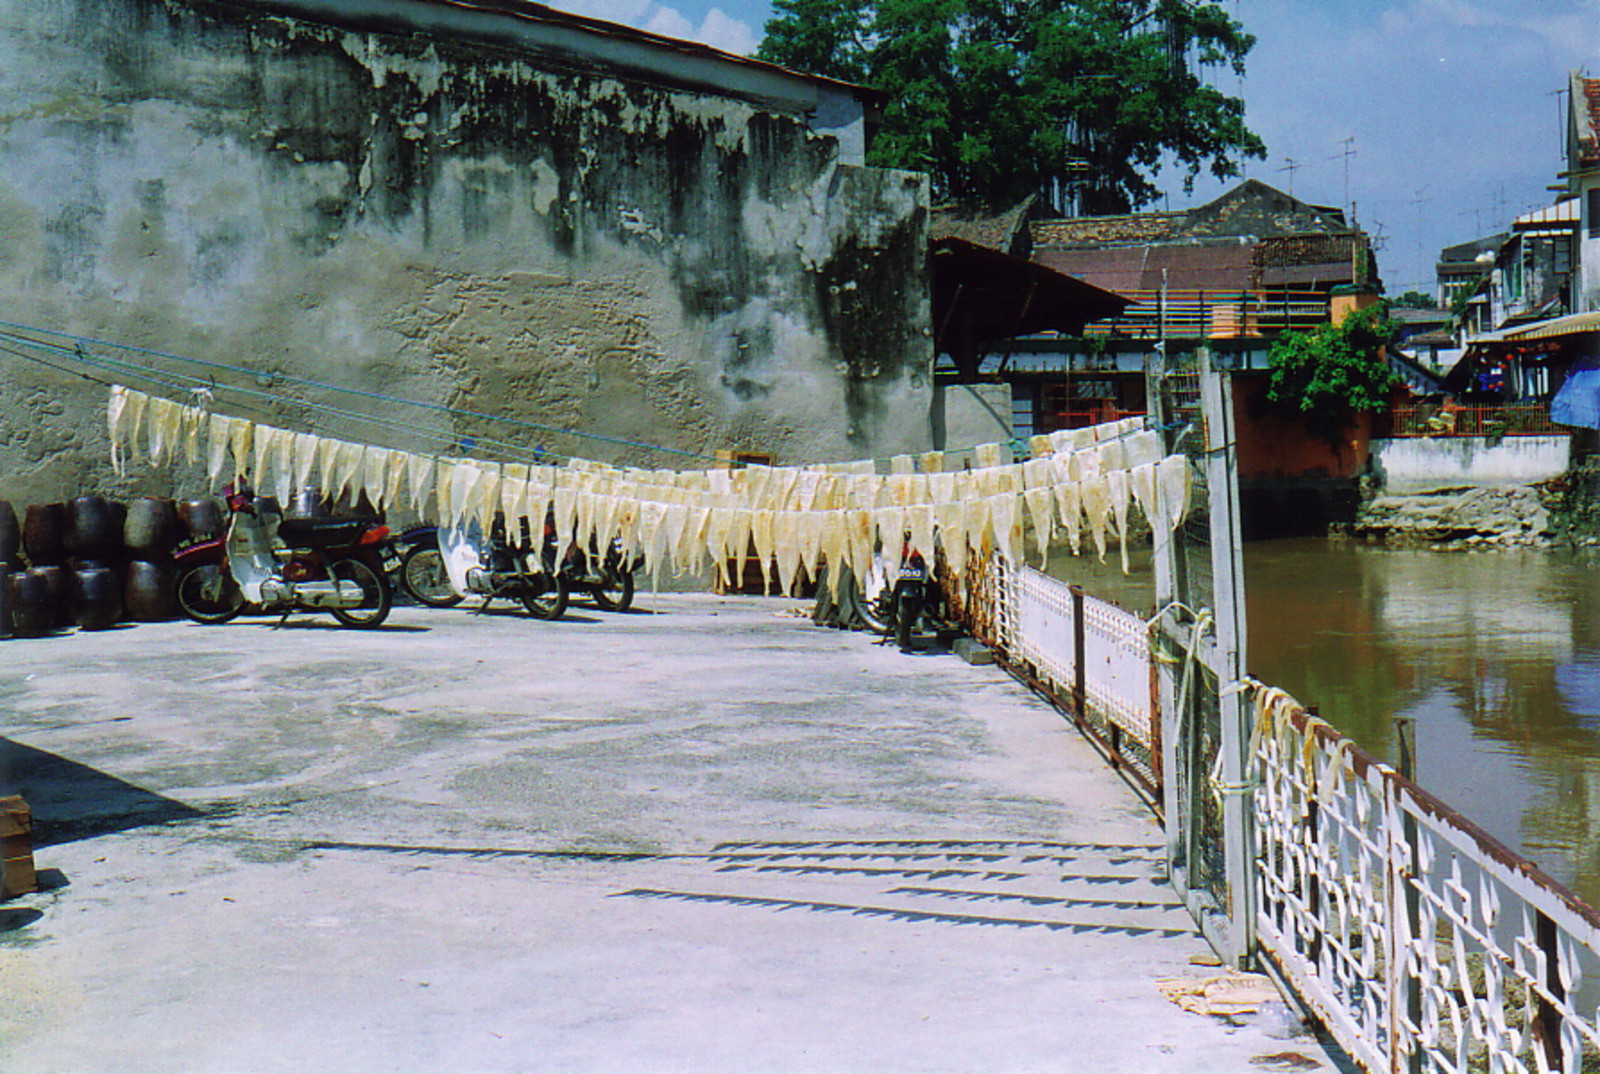 Fish drying by the river in Old Melaka